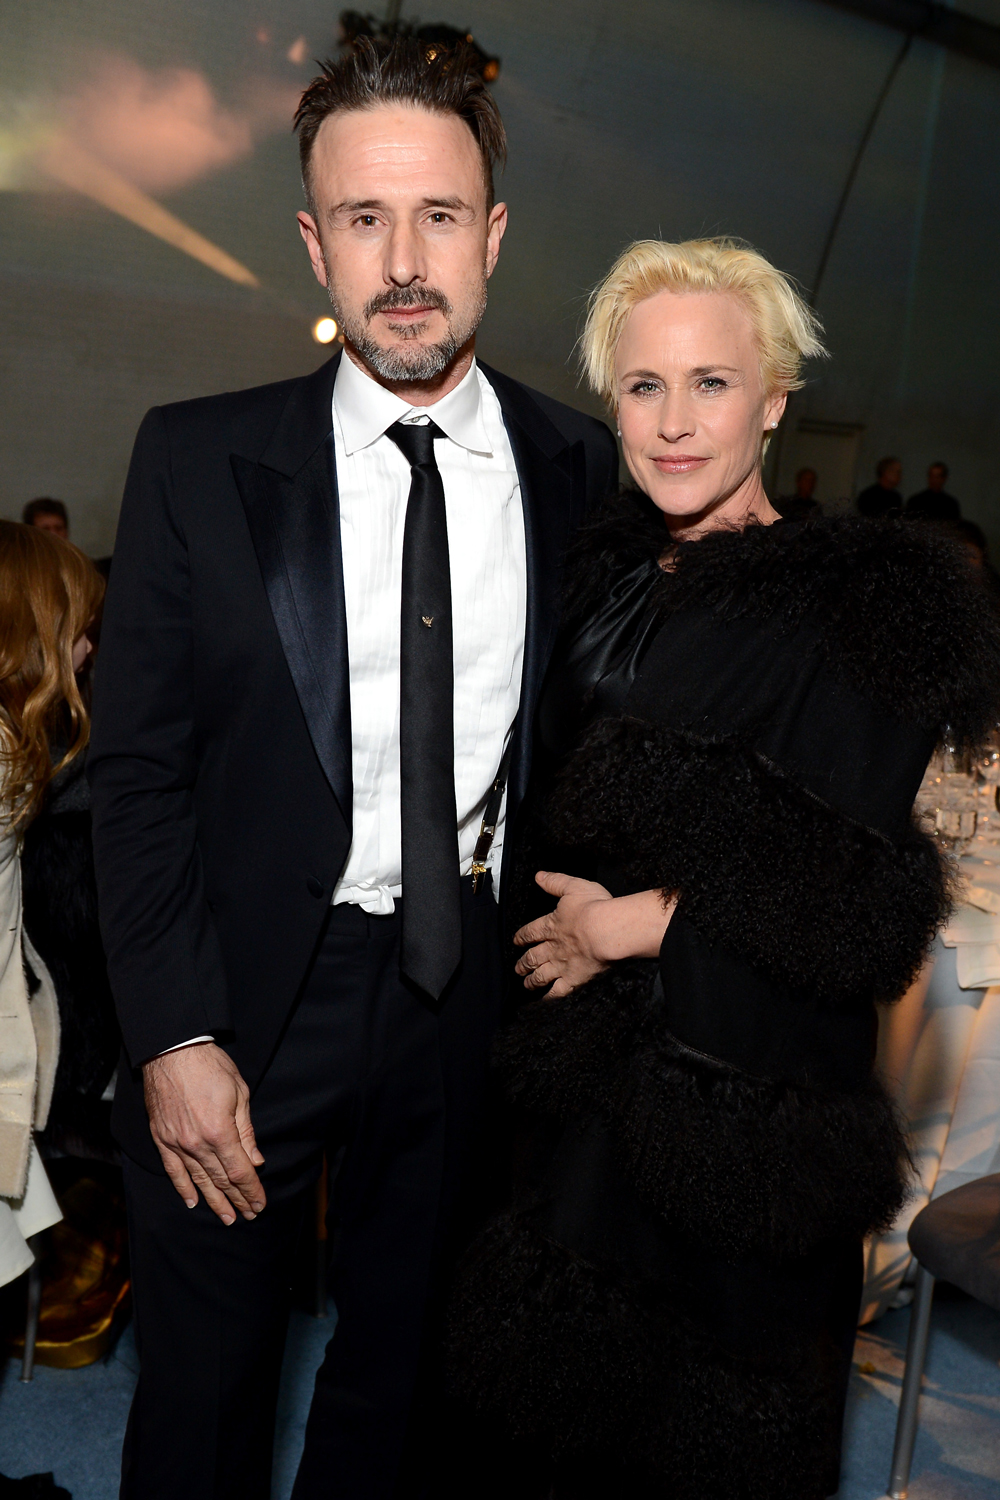 David and Patricia Arquette are a celebrity couple with cults in their past.